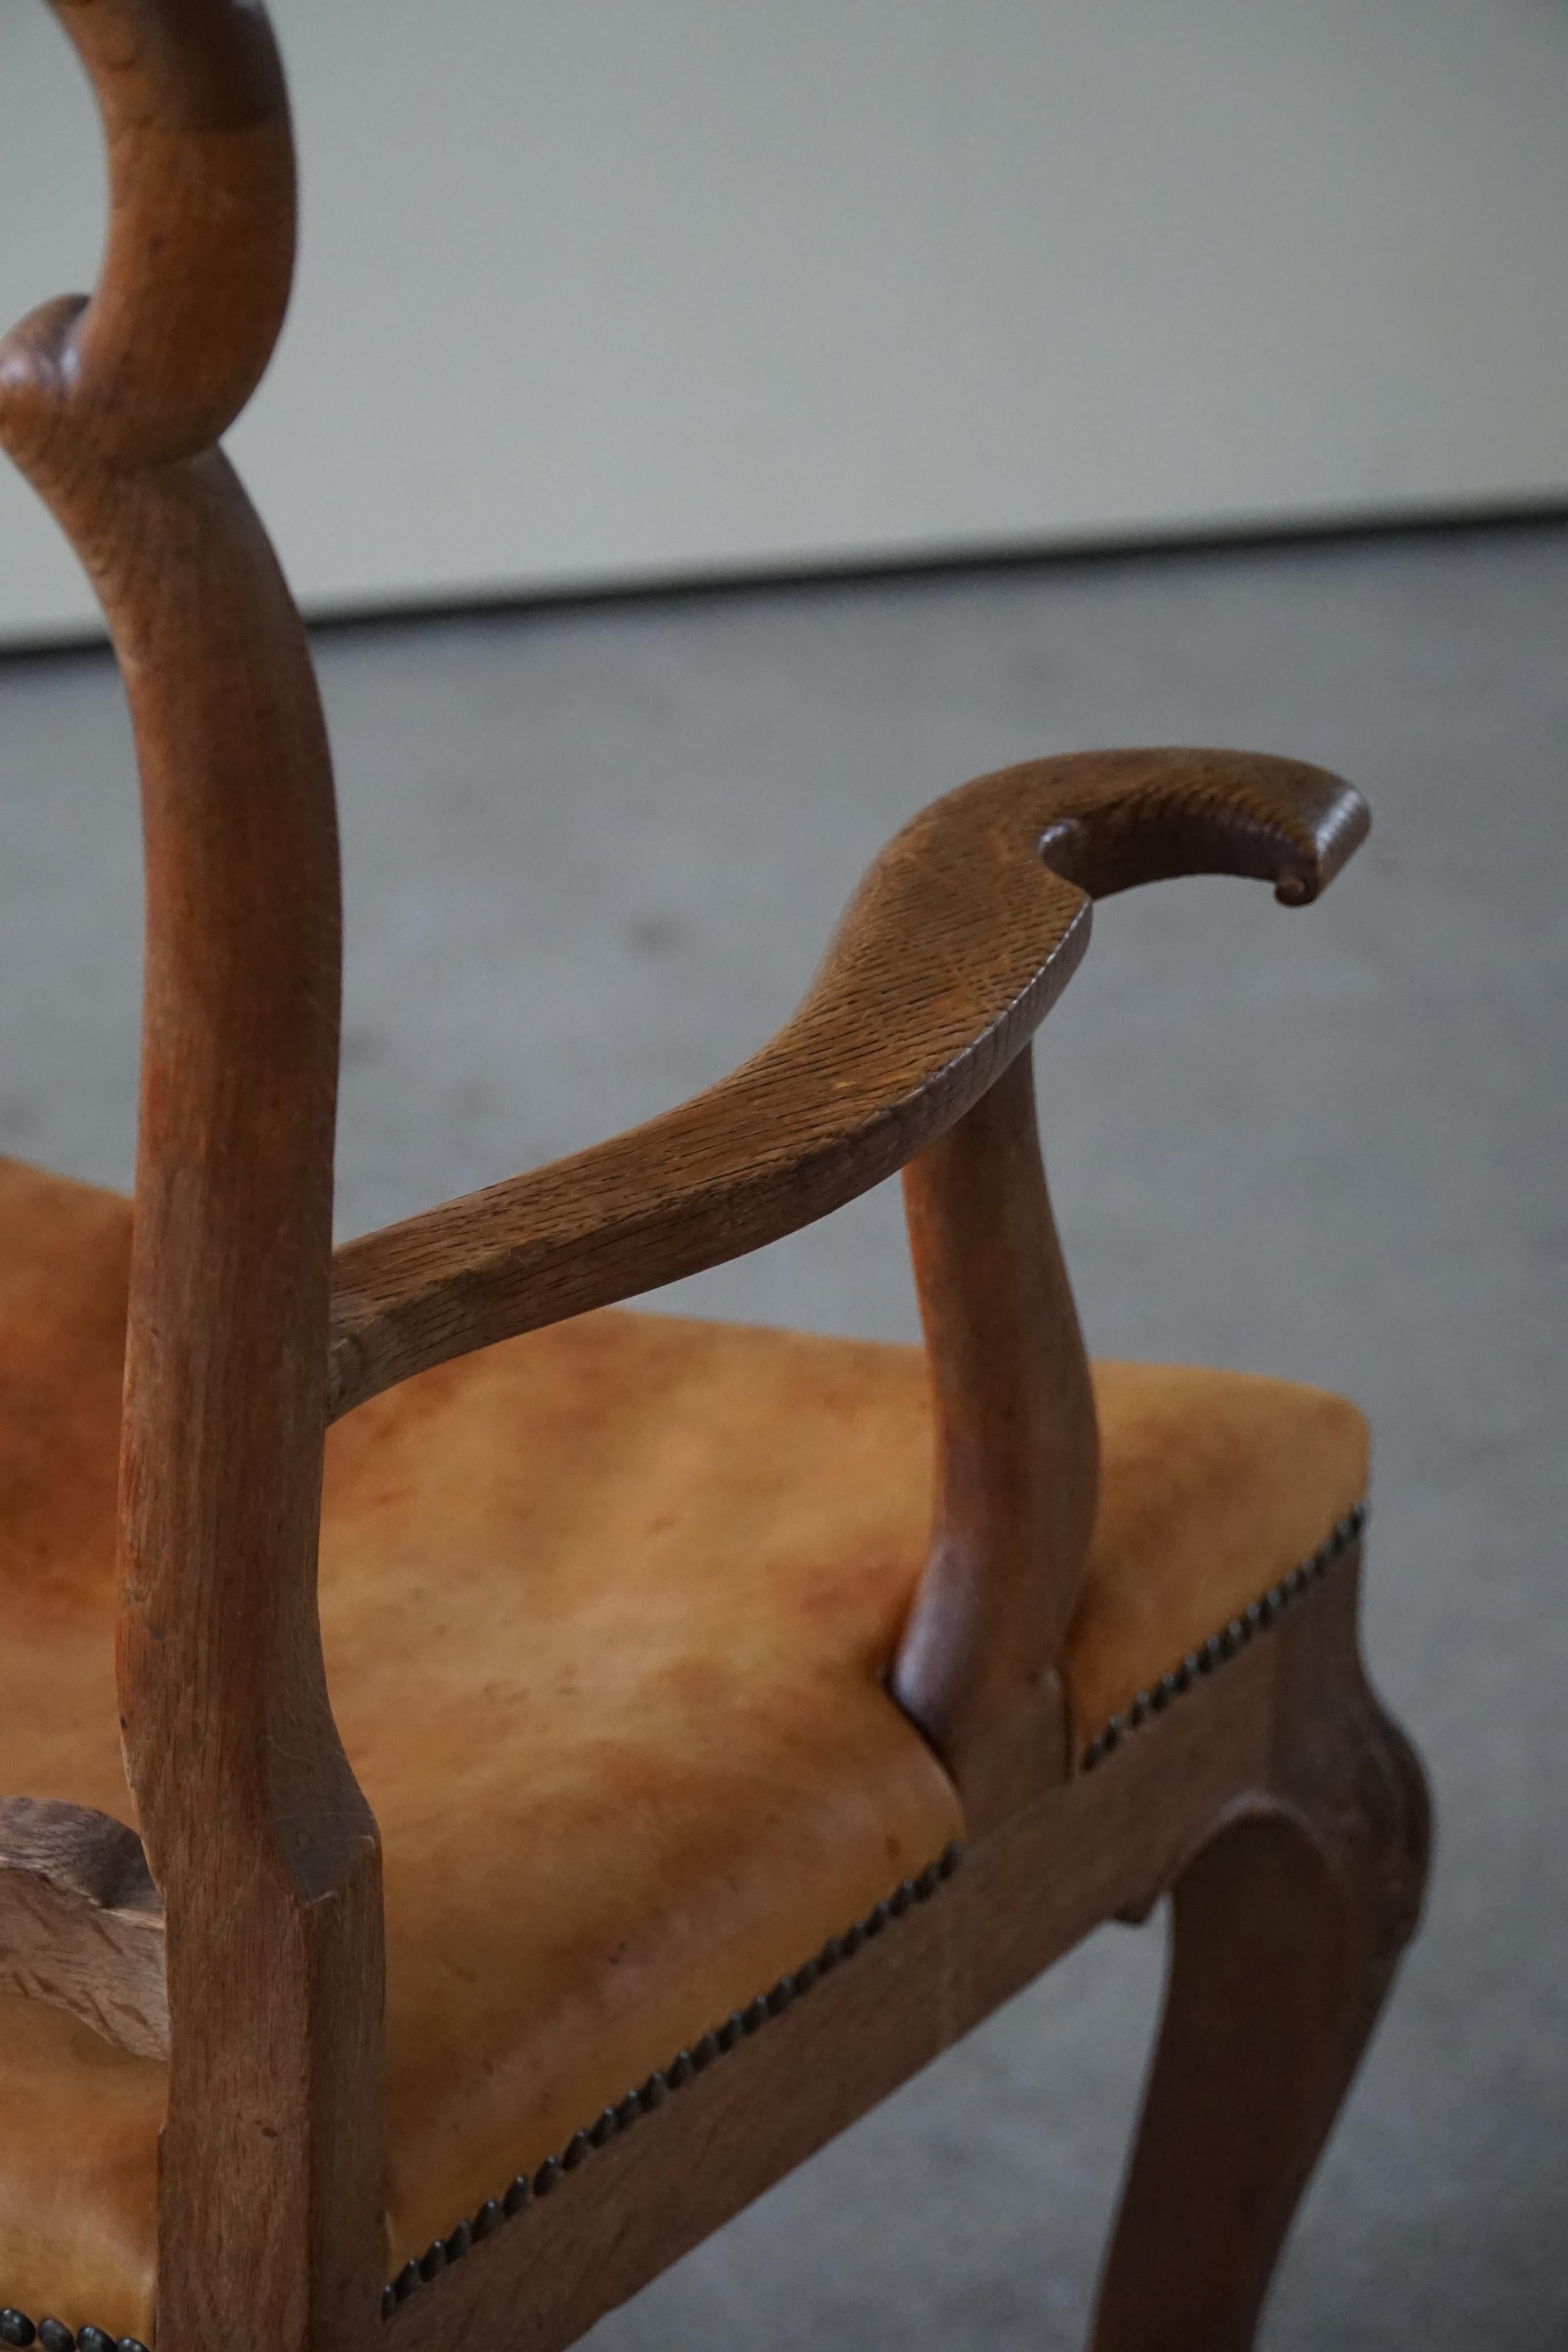  Sculptural Vintage Armchair in Oak and Leather, Danish Modern, 1940s For Sale 3